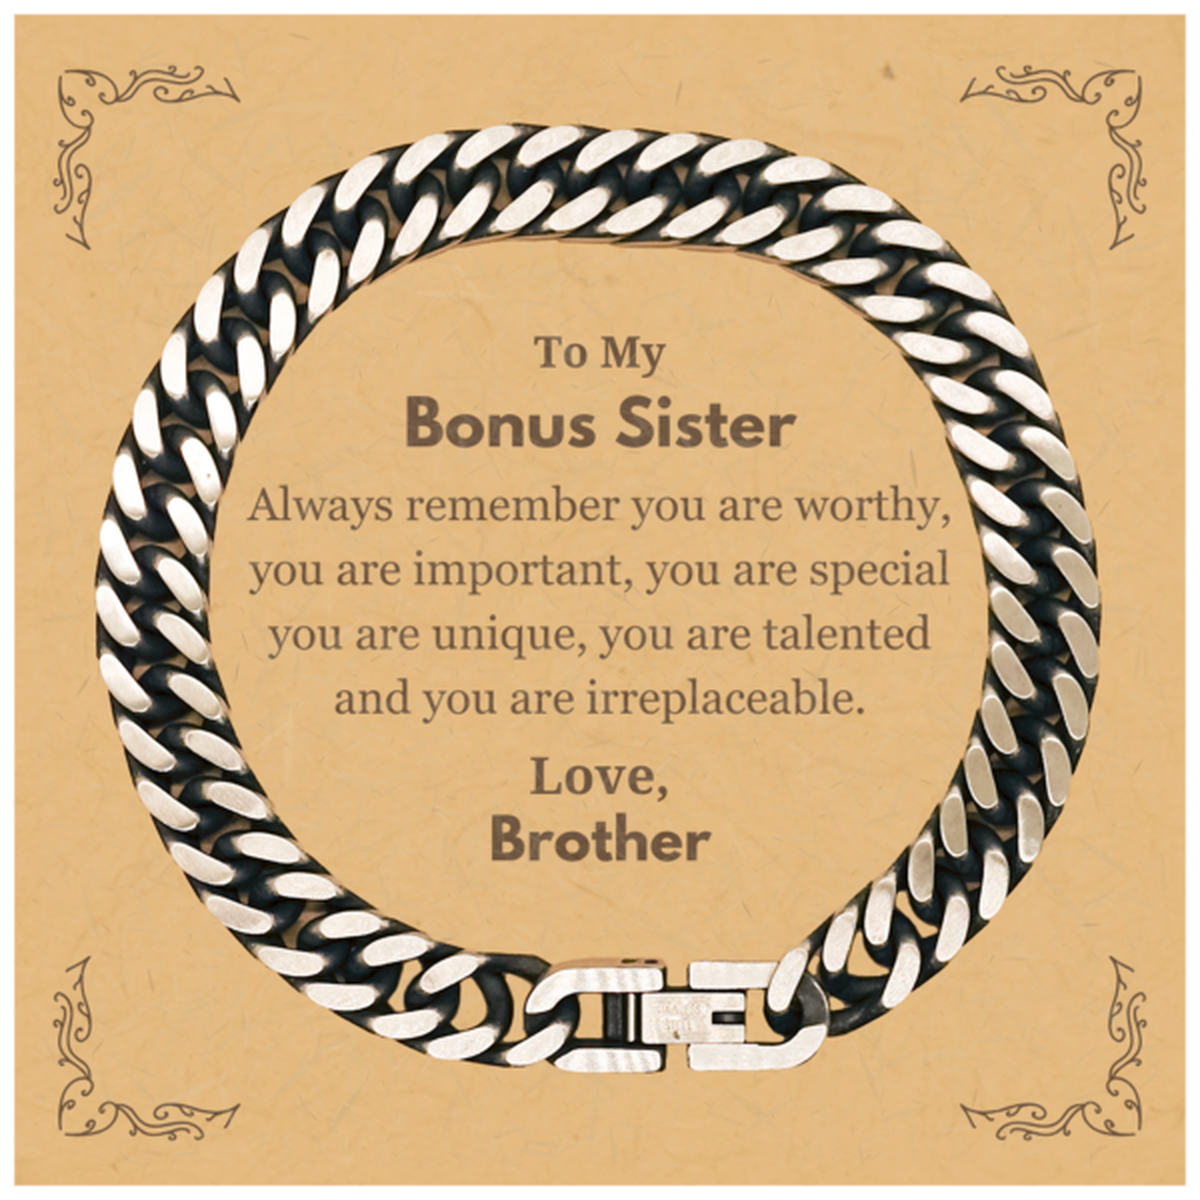 Bonus Sister Birthday Gifts from Brother, Inspirational Cuban Link Chain Bracelet for Bonus Sister Christmas Graduation Gifts for Bonus Sister Always remember you are worthy, you are important. Love, Brother